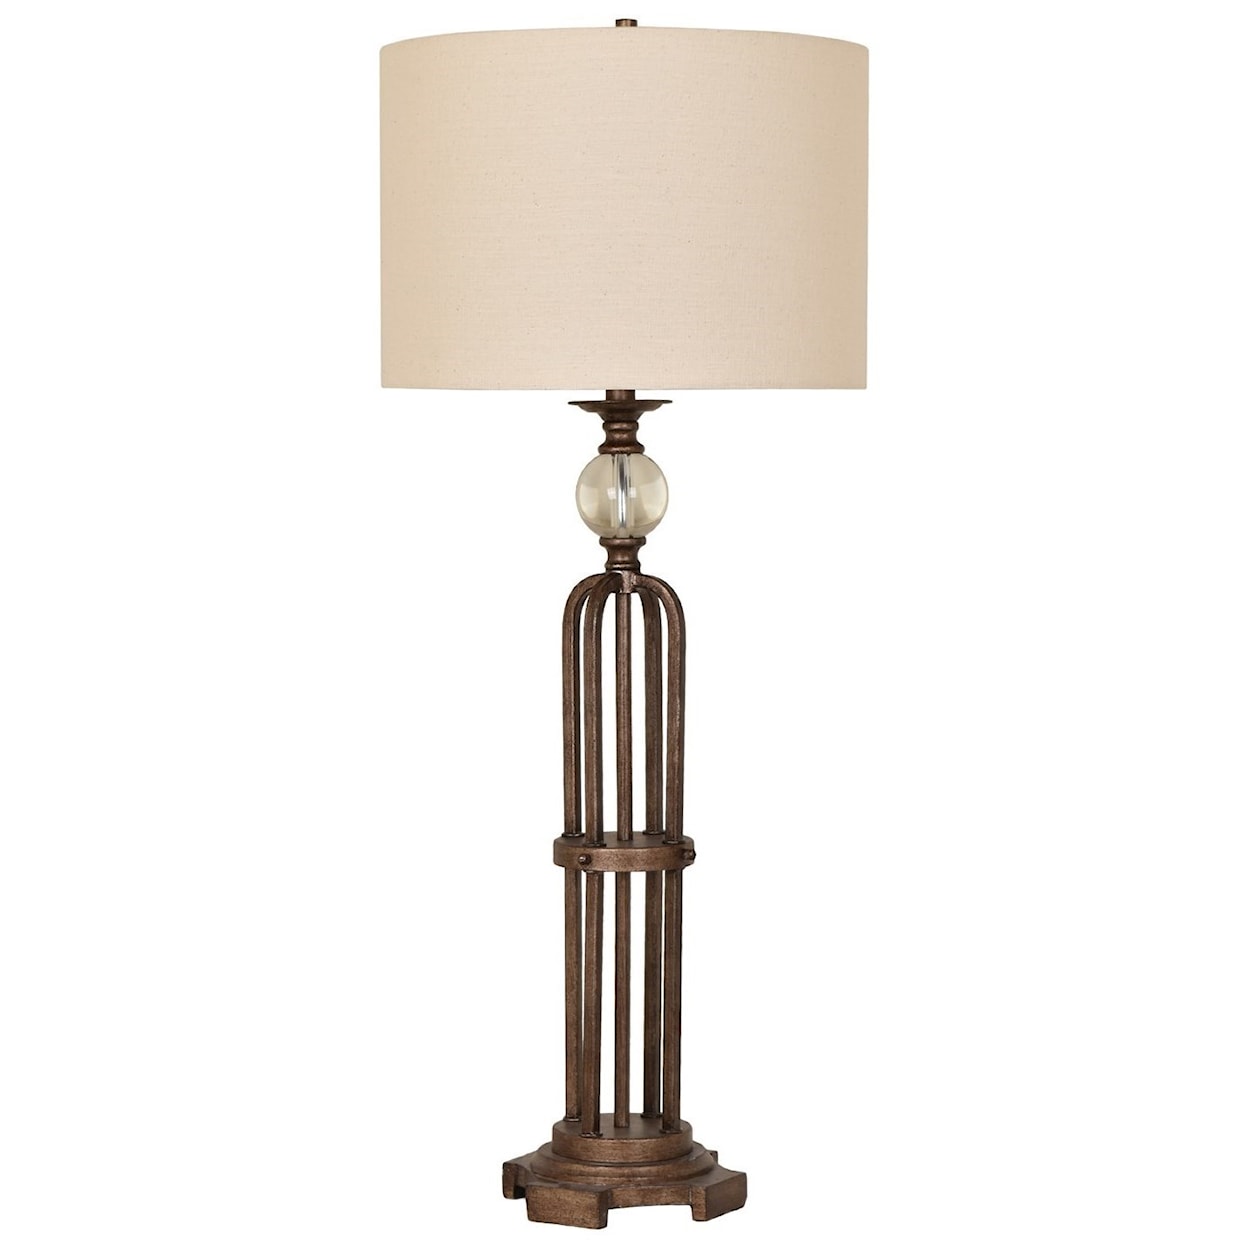 Crestview Collection Lighting Espinoza Table Lamp